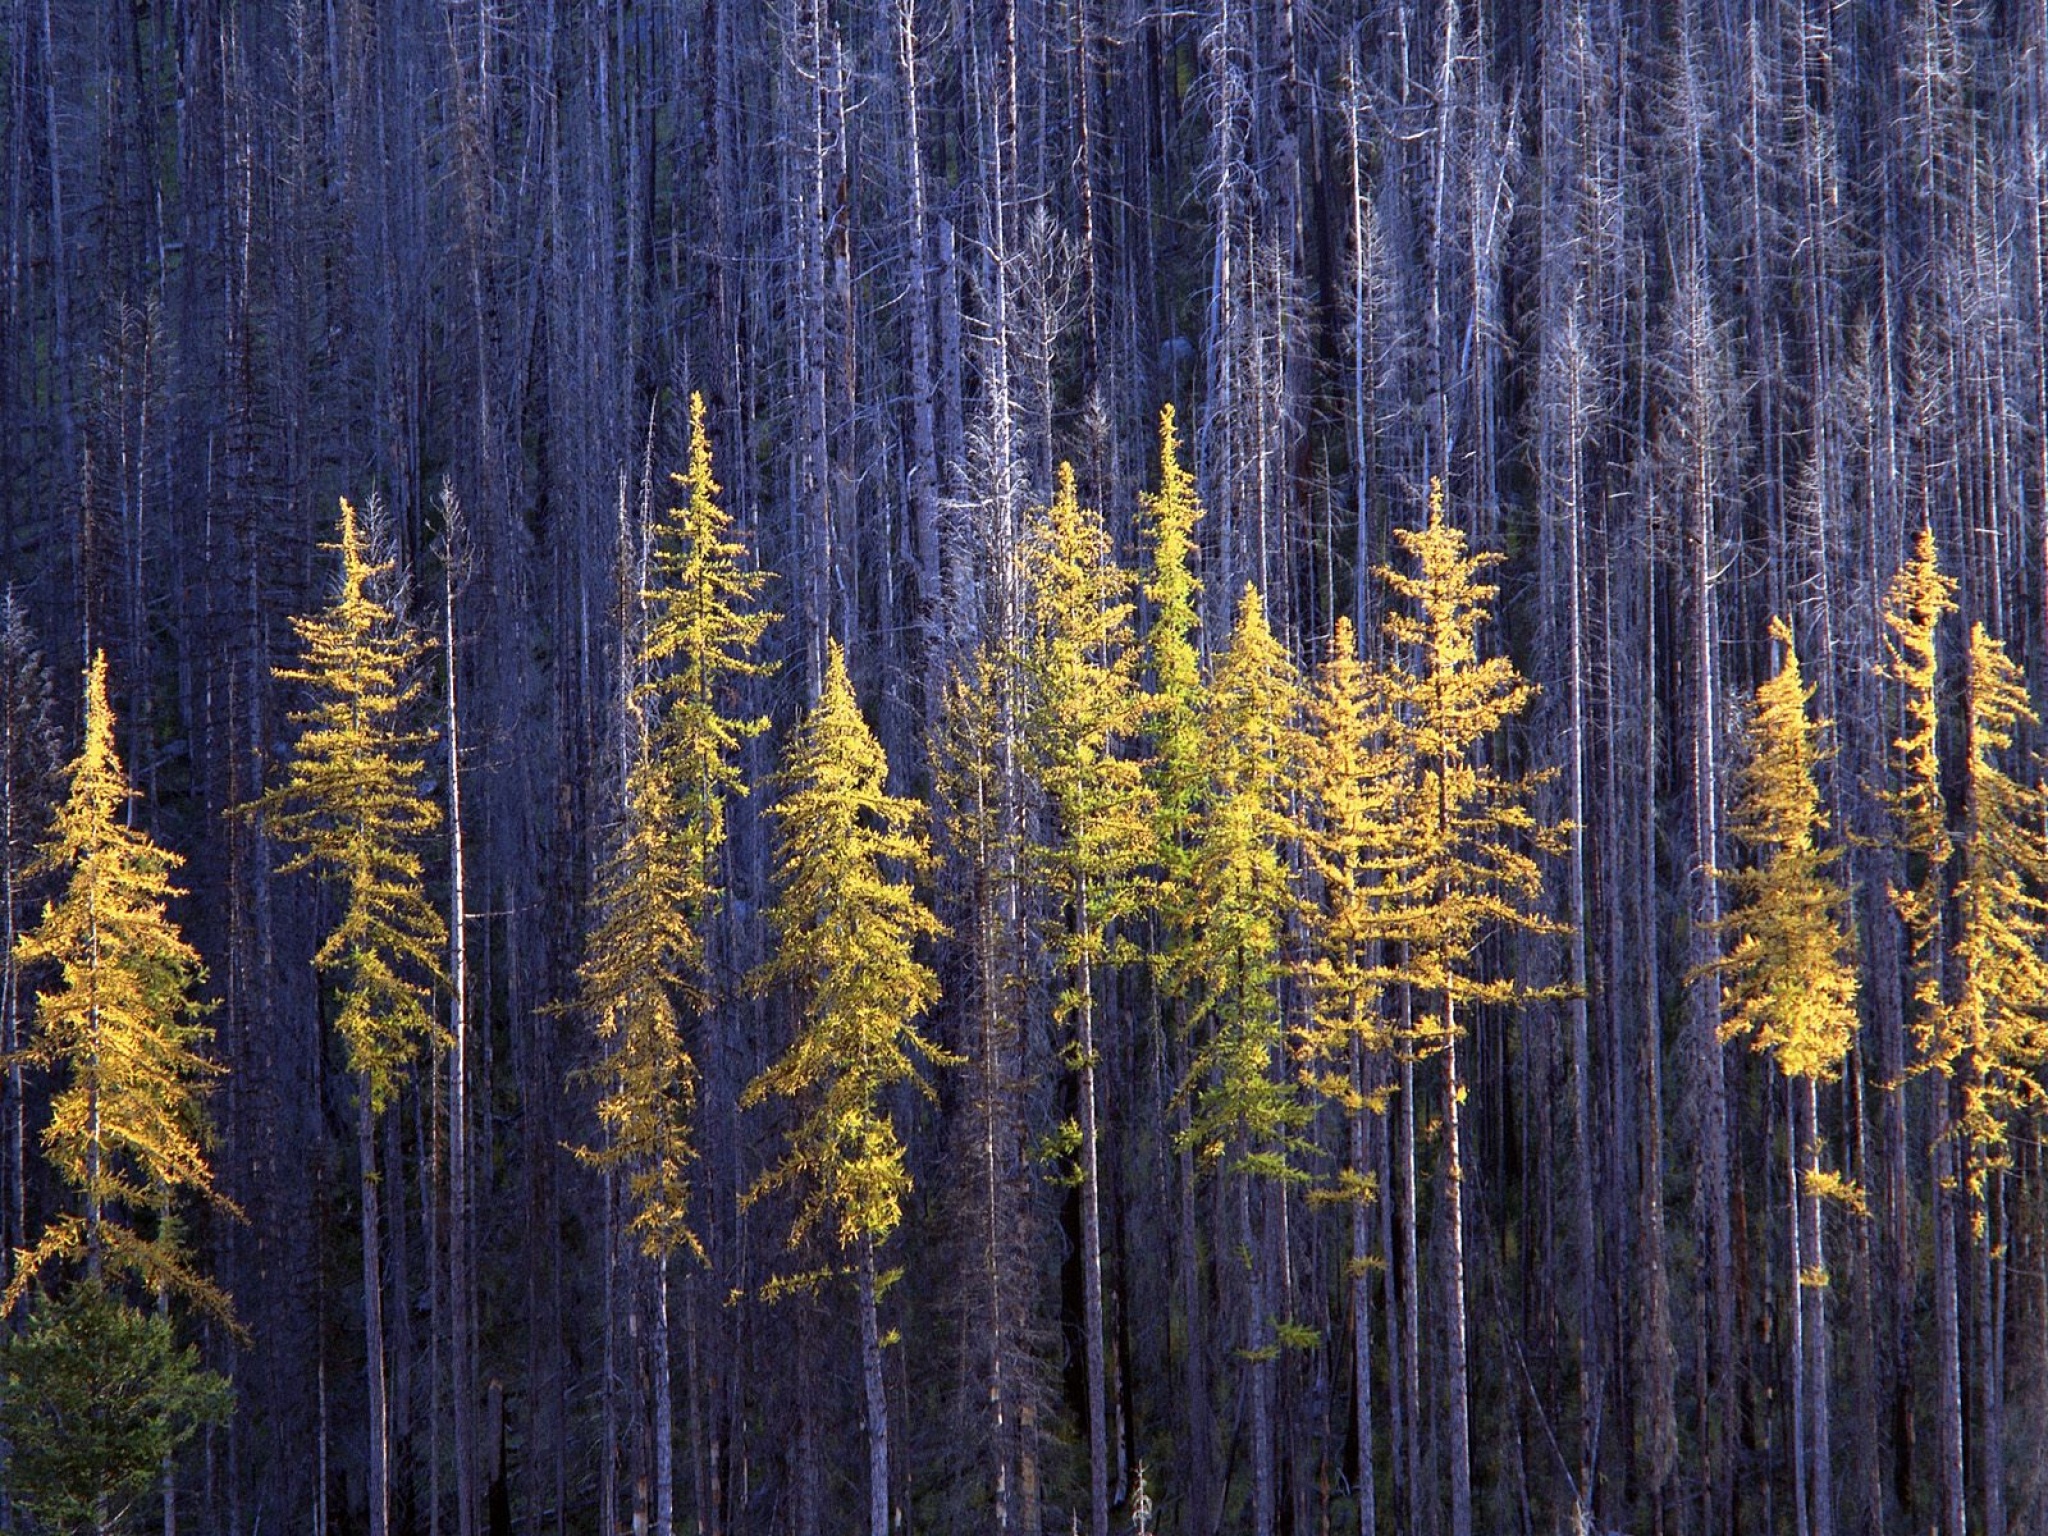 Autumn Larch Trees, Colville National Forest, Wa